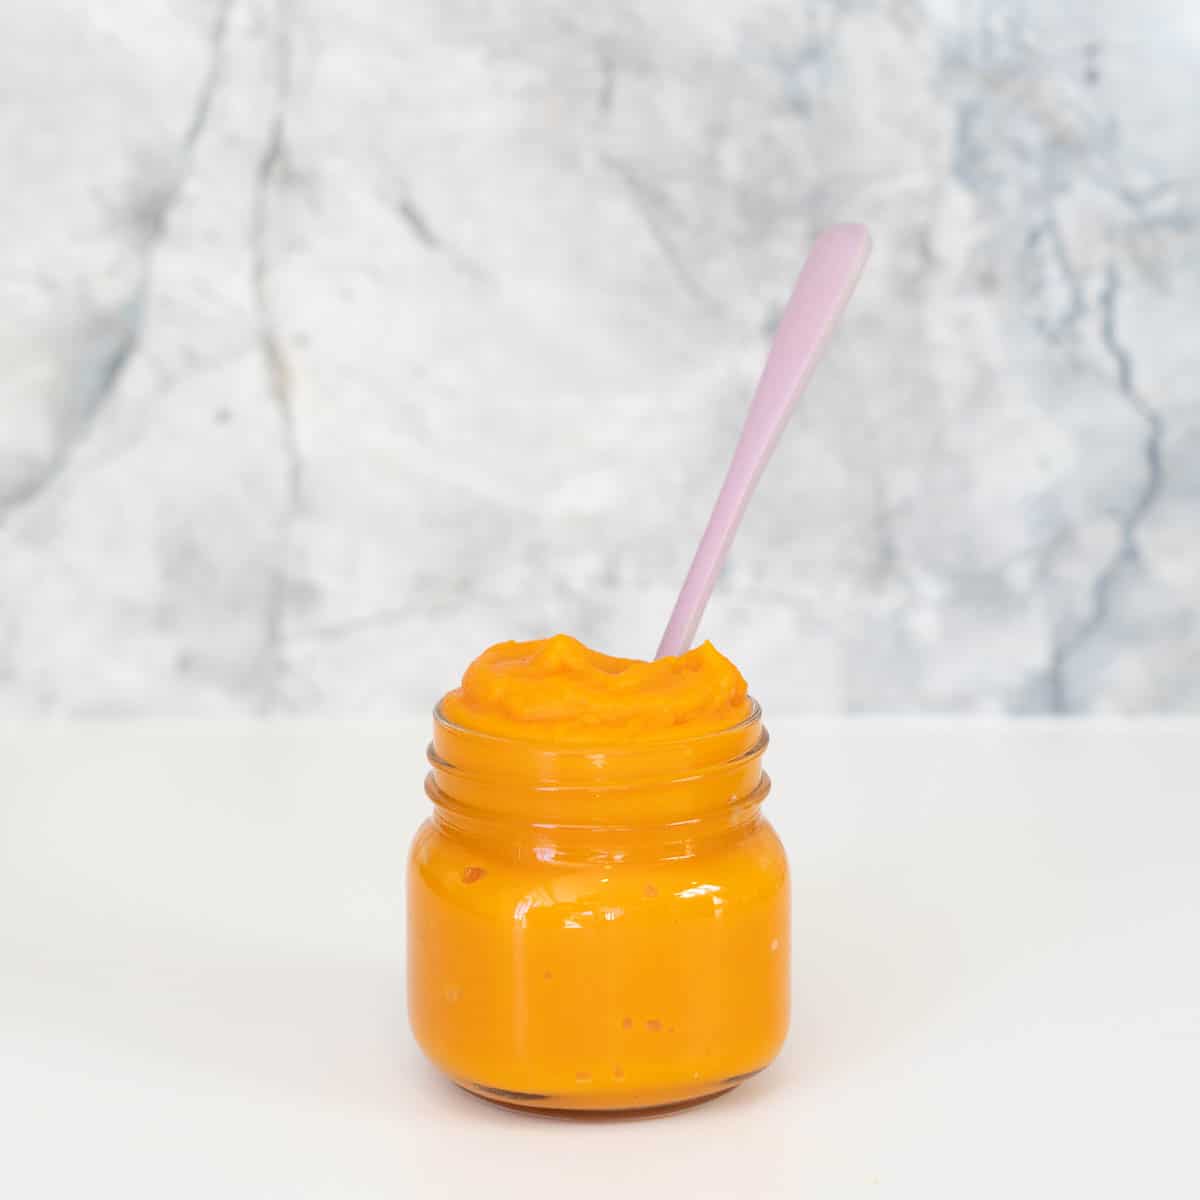 A small glass jar filled with orange baby puree and a purple wooden baby spoon.